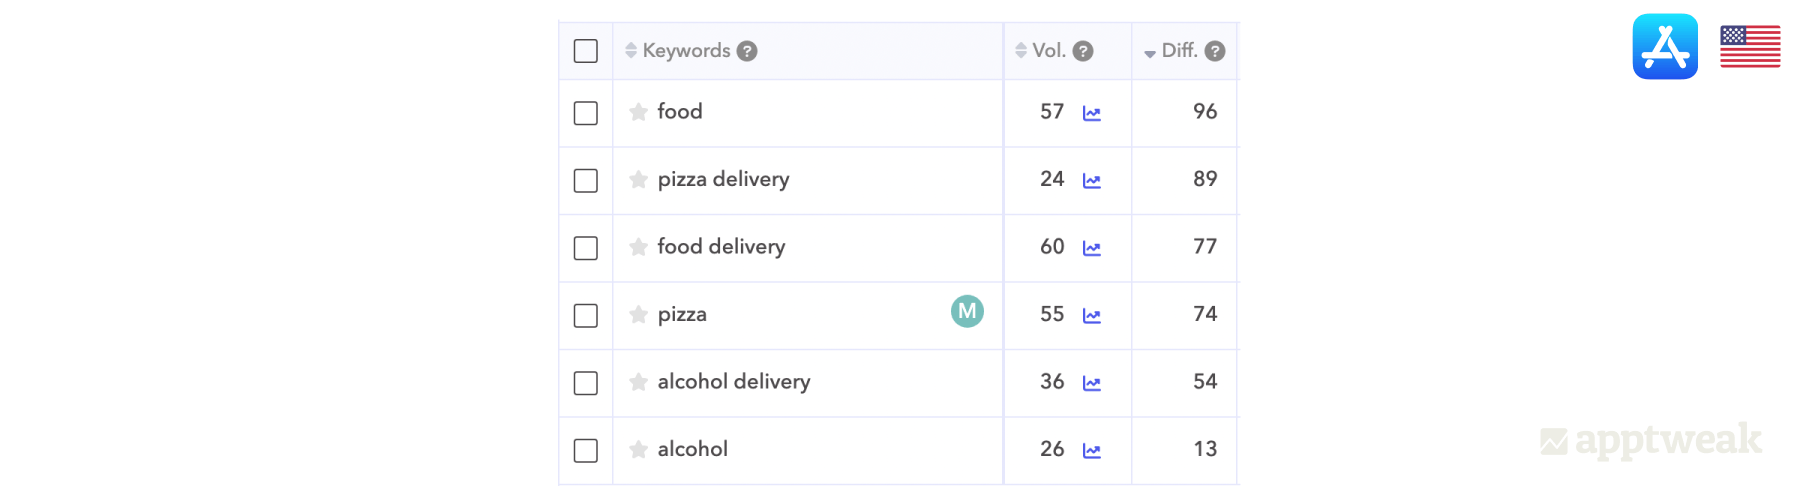 Comparing Volume and Difficulty on food- and food-delivery-related keywords - iOS US